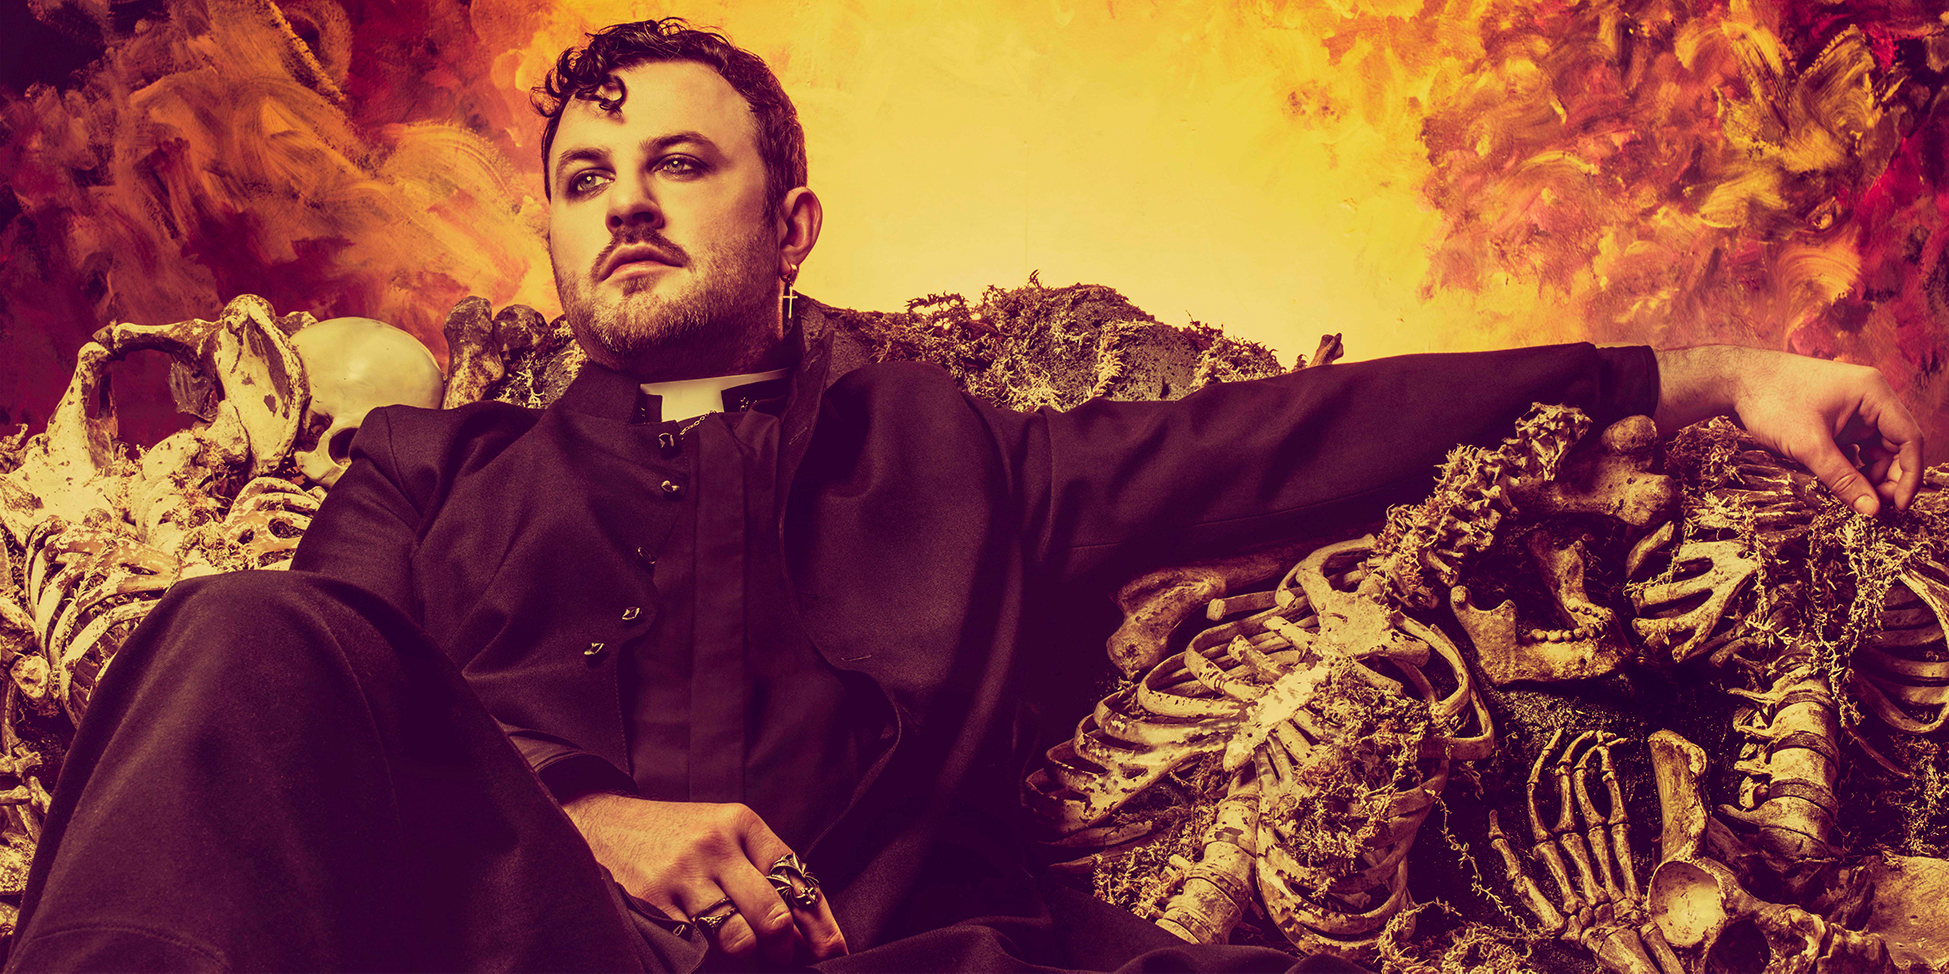 WINNER OF 2018 EDINBURGH COMEDY AWARD FOR BEST NEWCOMER CIARÁN DOWD RETURNS TO THE FRINGE WITH HIGHLY ANTICIPATED FOLLOW-UP ‘PADRE RODOLFO’